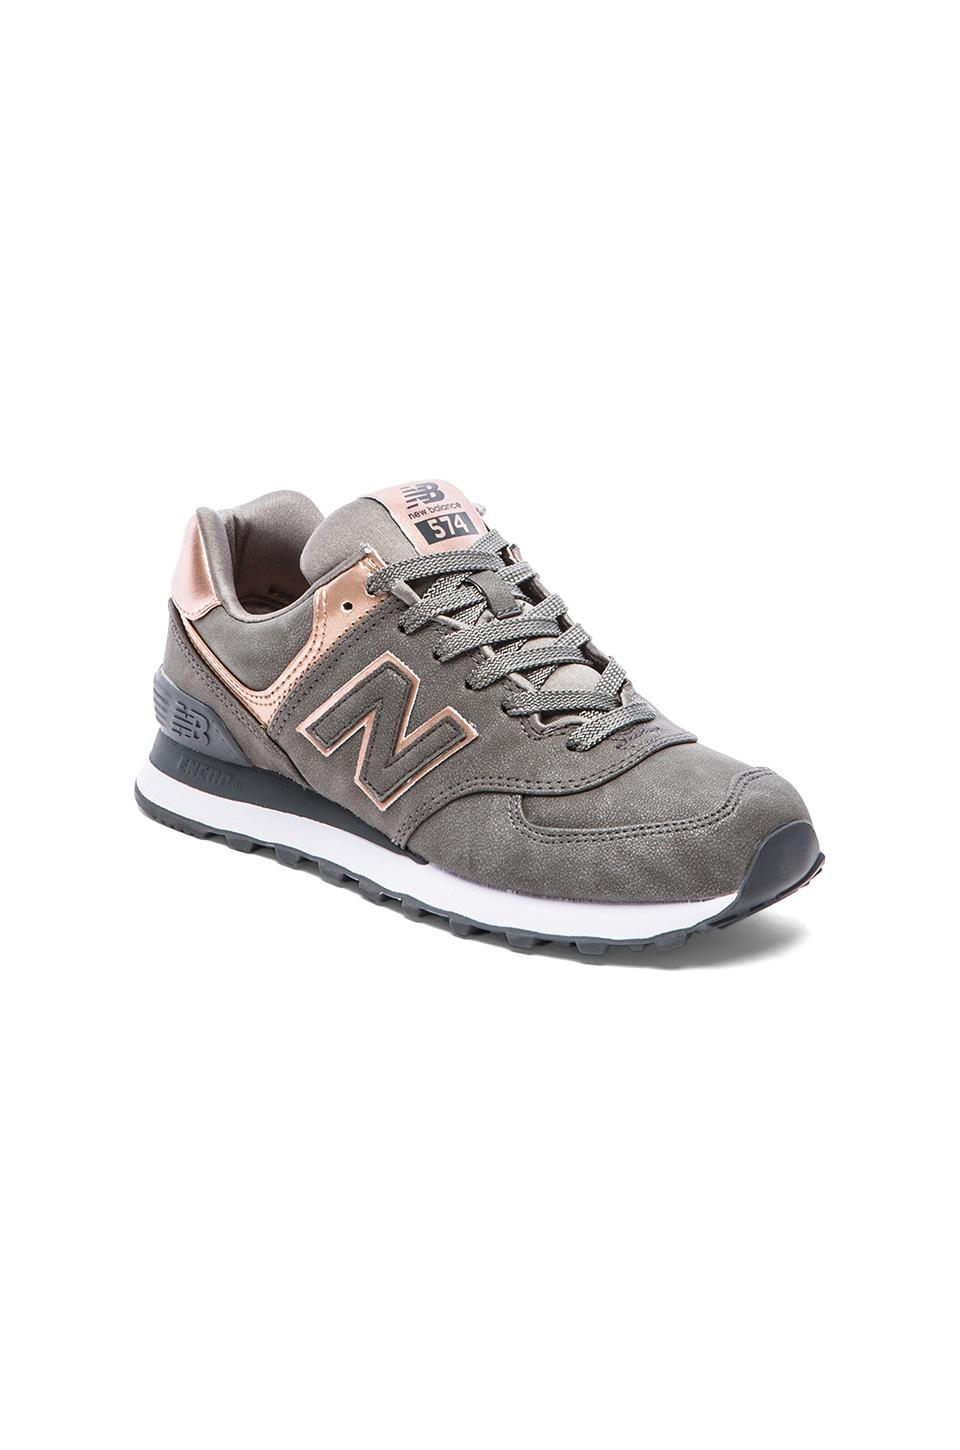 New Balance 574 Precious Metals Collection Sneaker in Silver (Metallic) |  Lyst